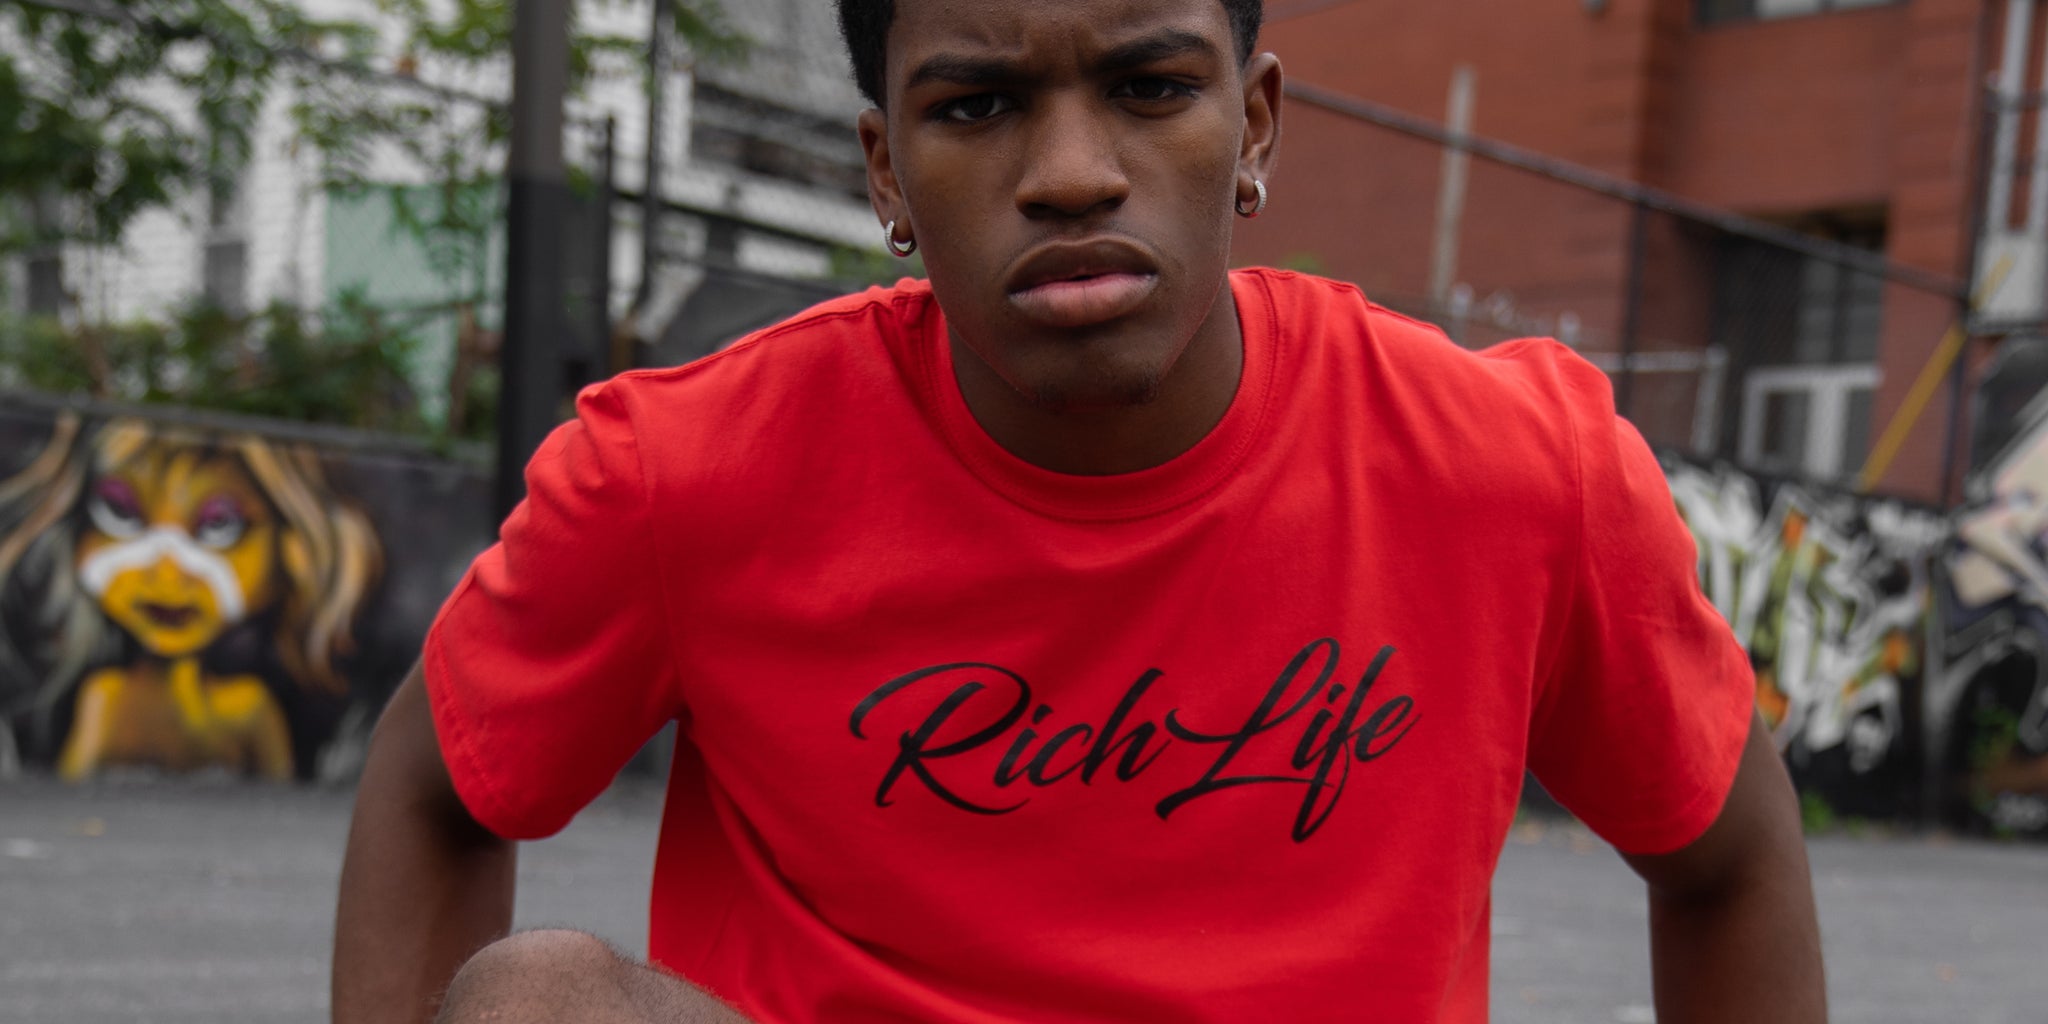 Rich Life | Fashion Trendy Clothing, Accessories, and More for Men, Women, and Kids